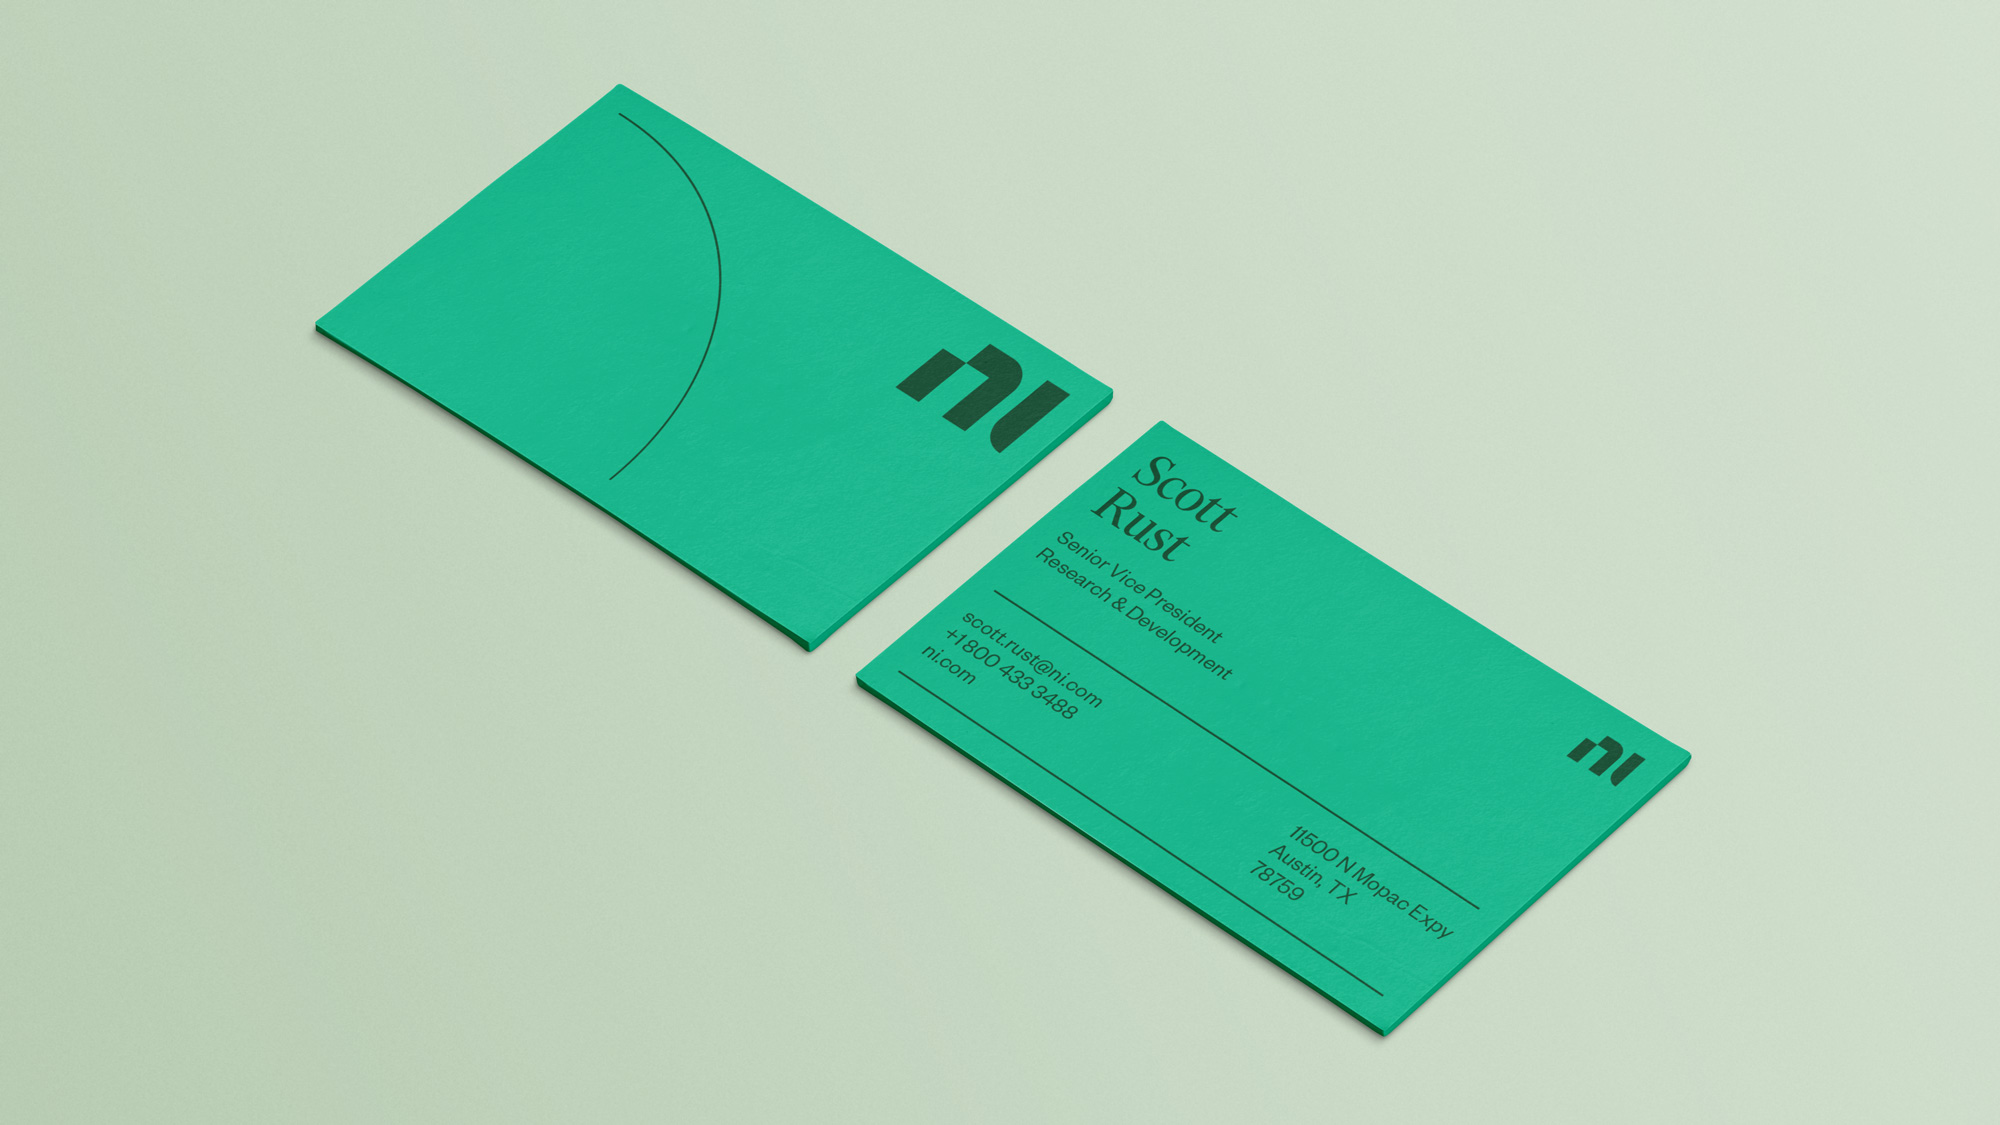 Follow-up: New Logo and Identity for NI by Gretel